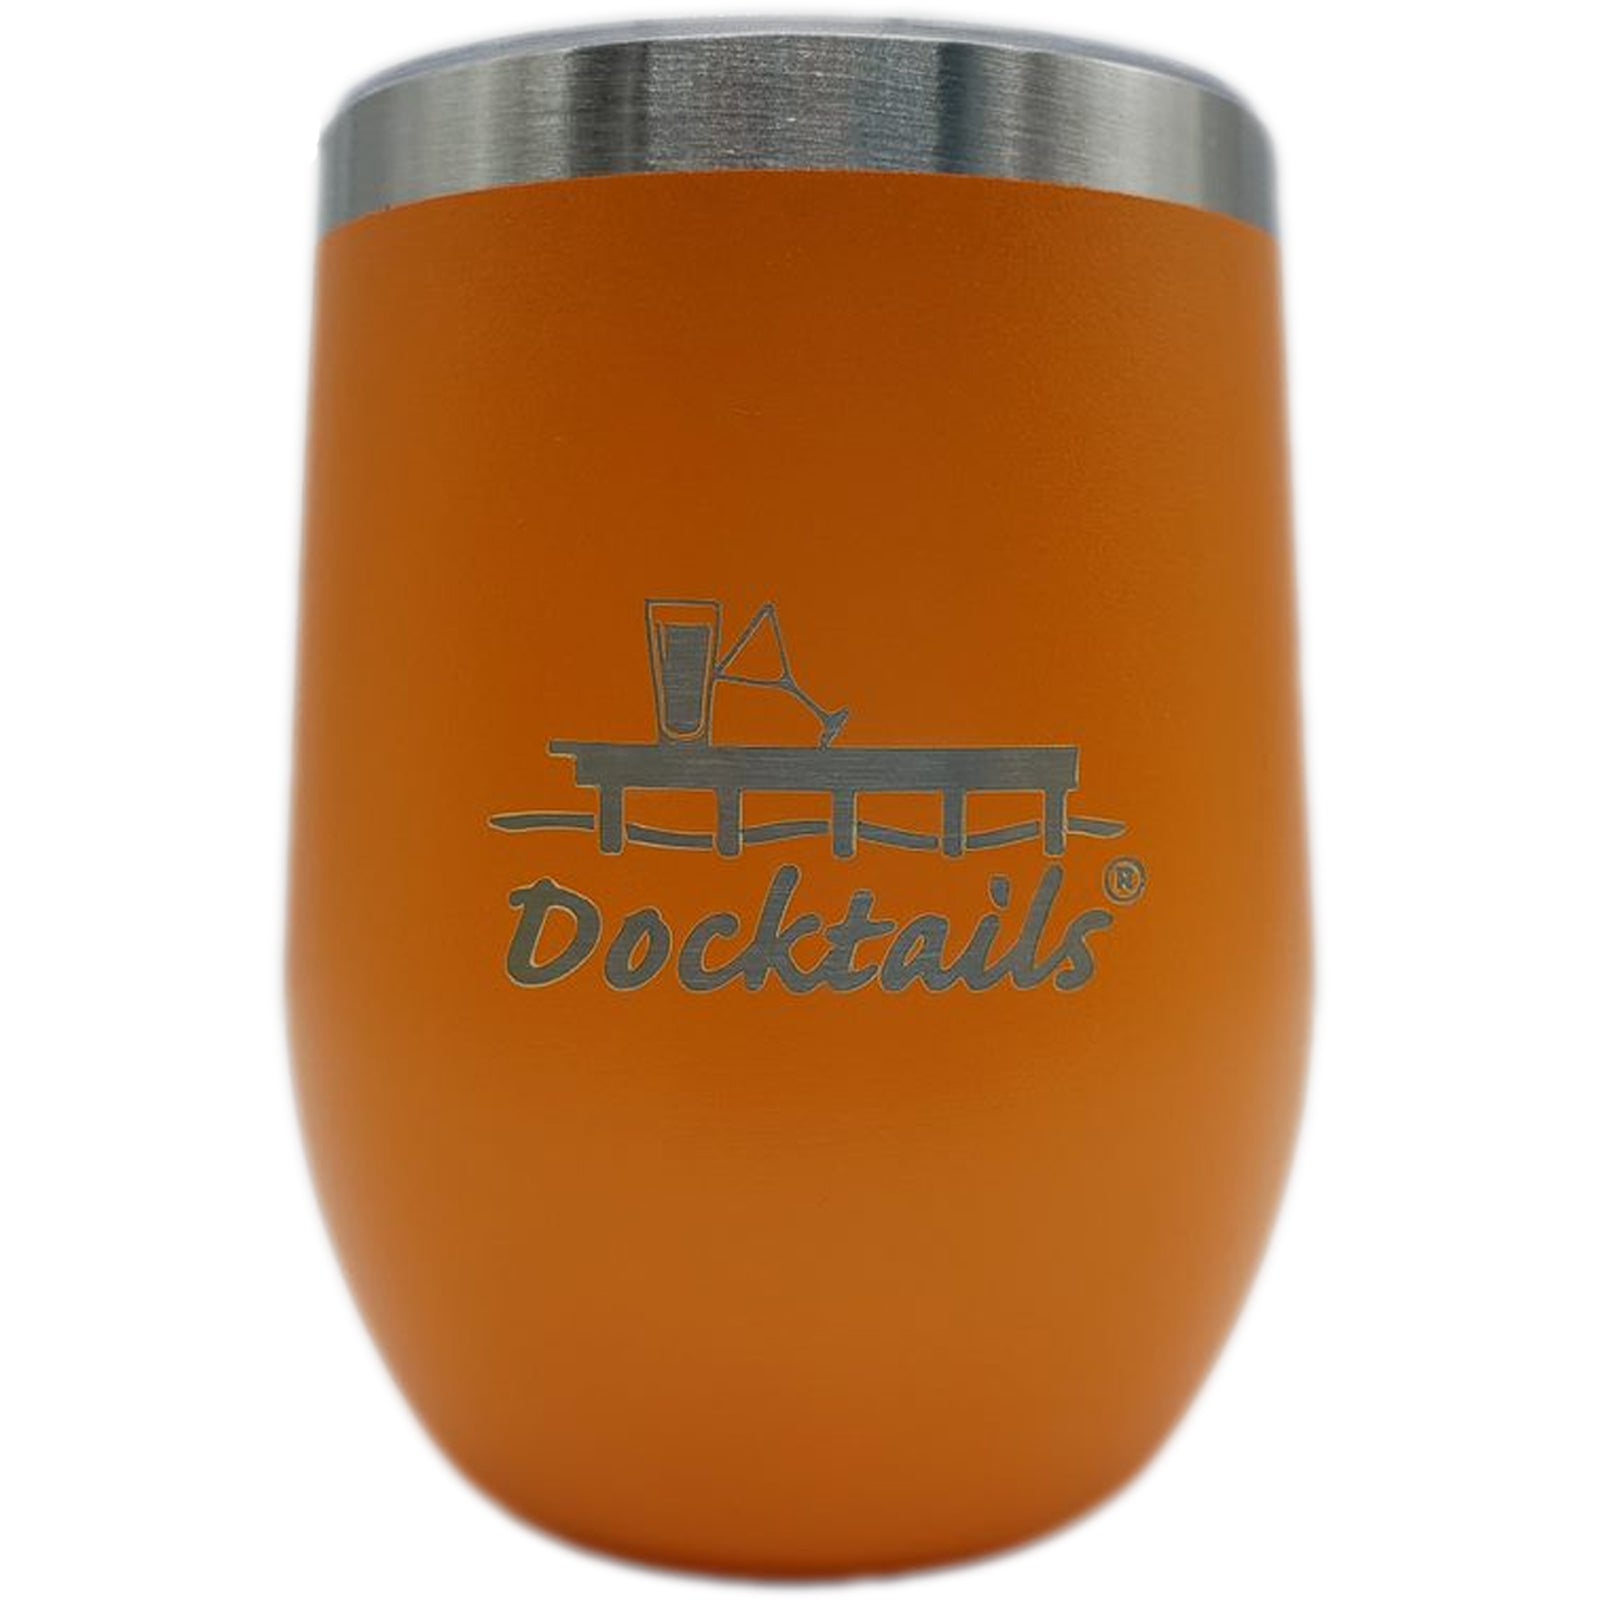 Docktails Insulated Martini Cup With Lid - Hawaiian Blue